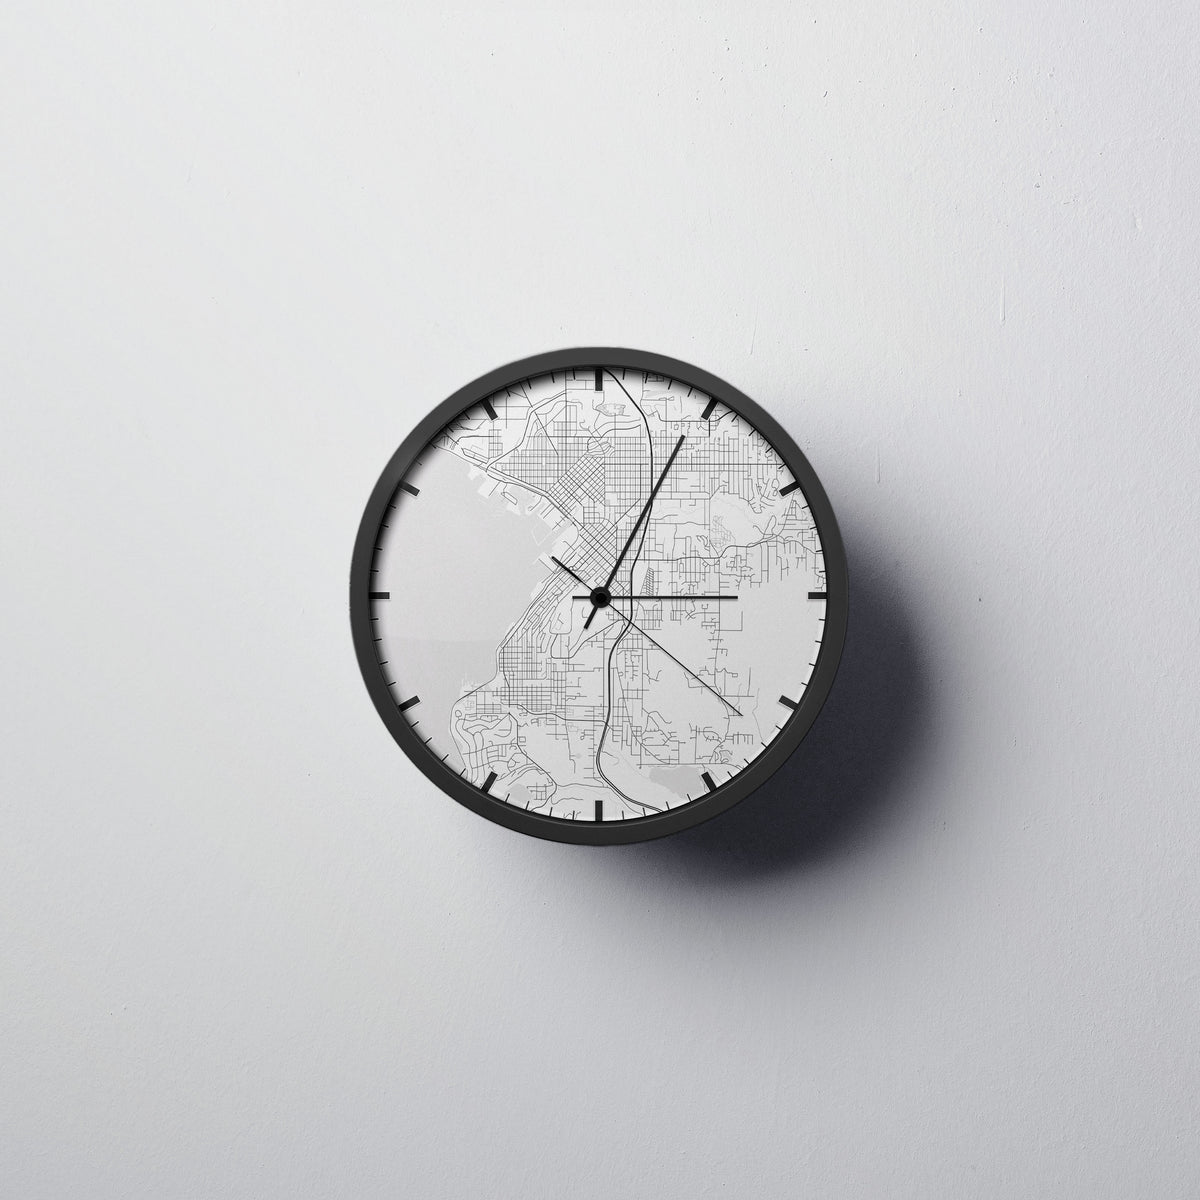 Bellingham Wall Clock - Point Two Design